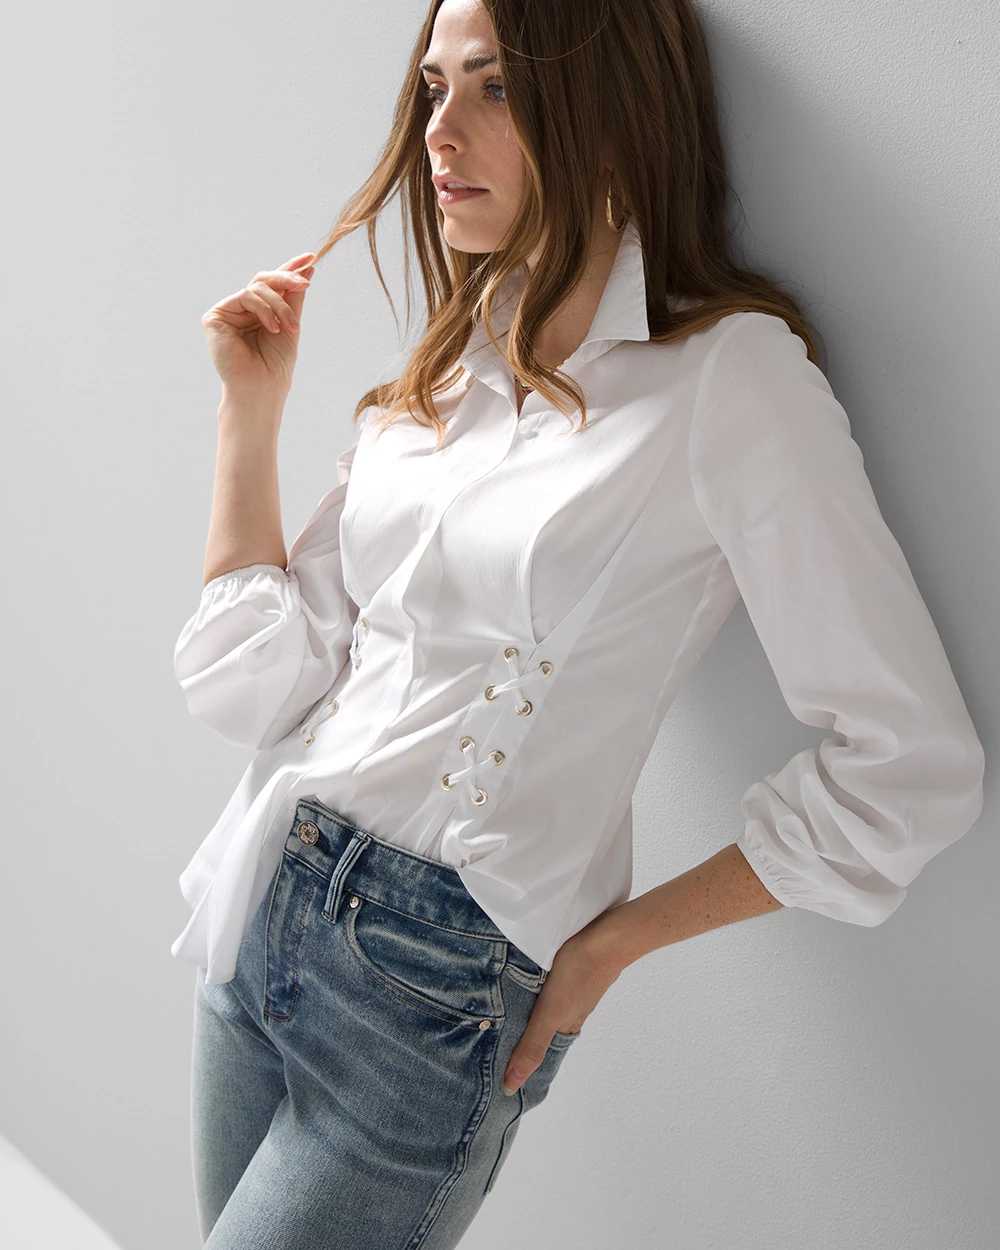 Grommet Poplin Shirt click to view larger image.